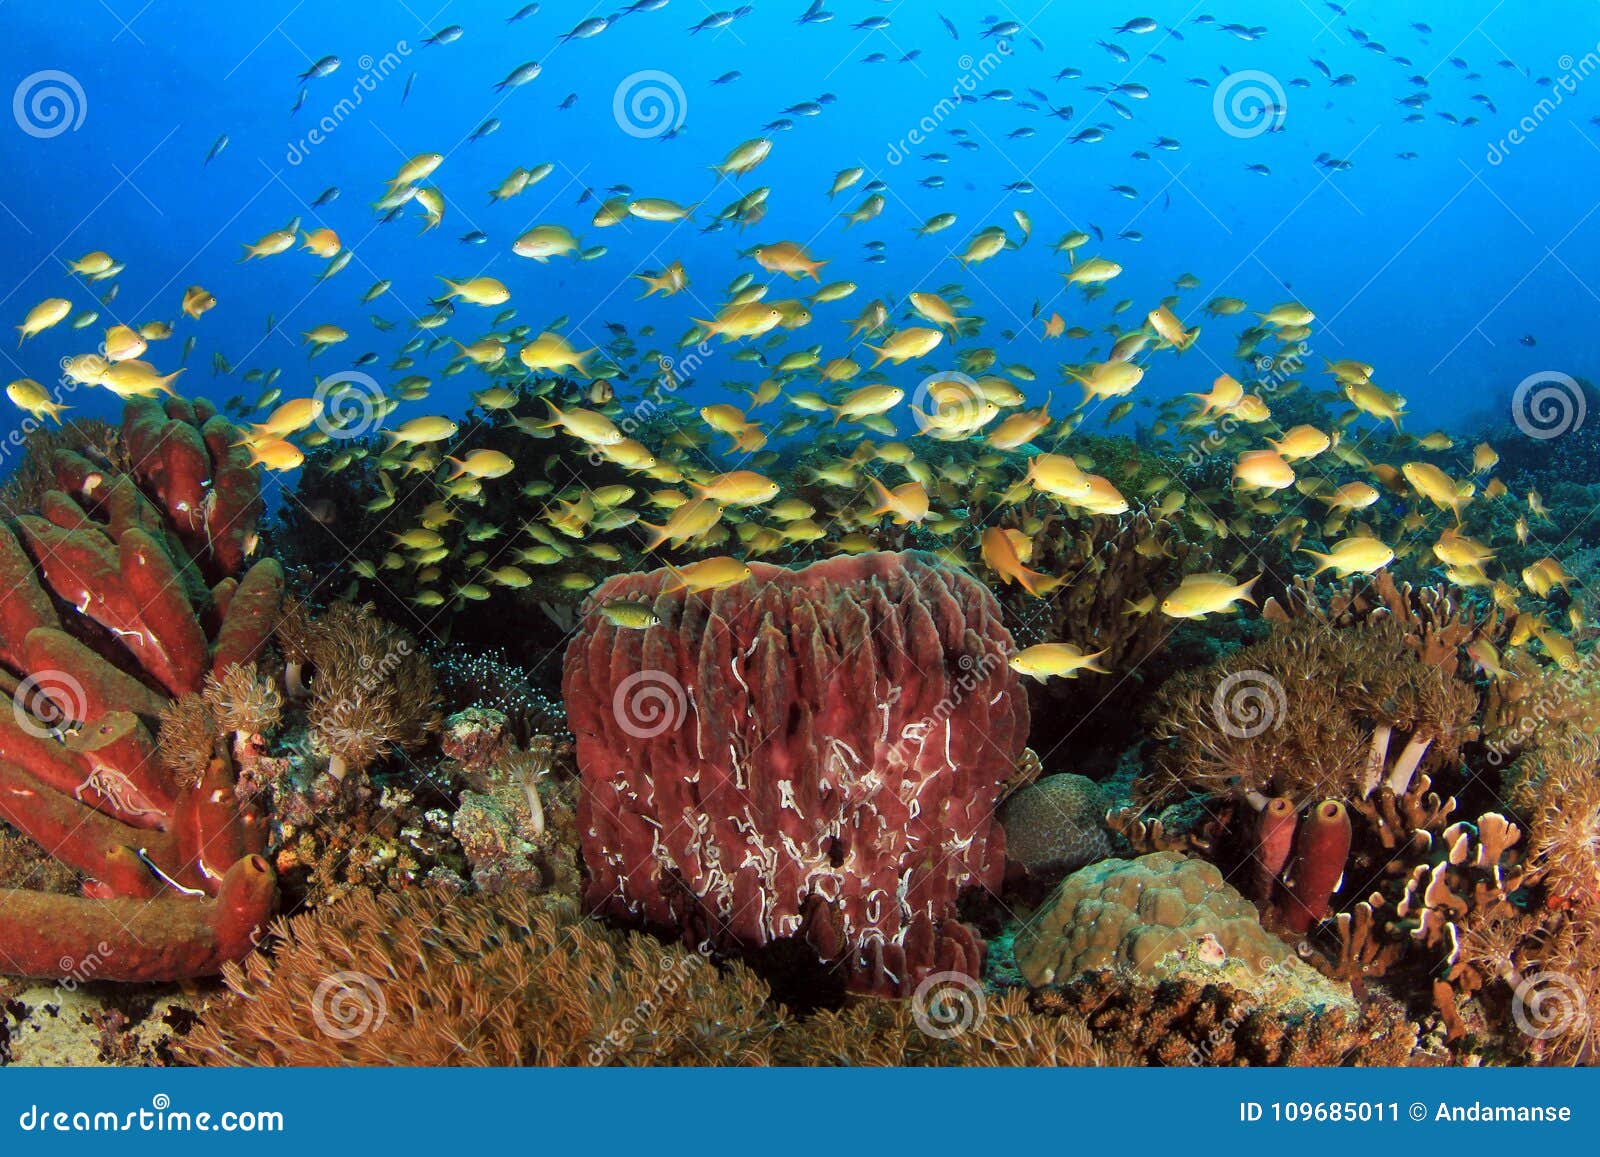 coral reef moalboal